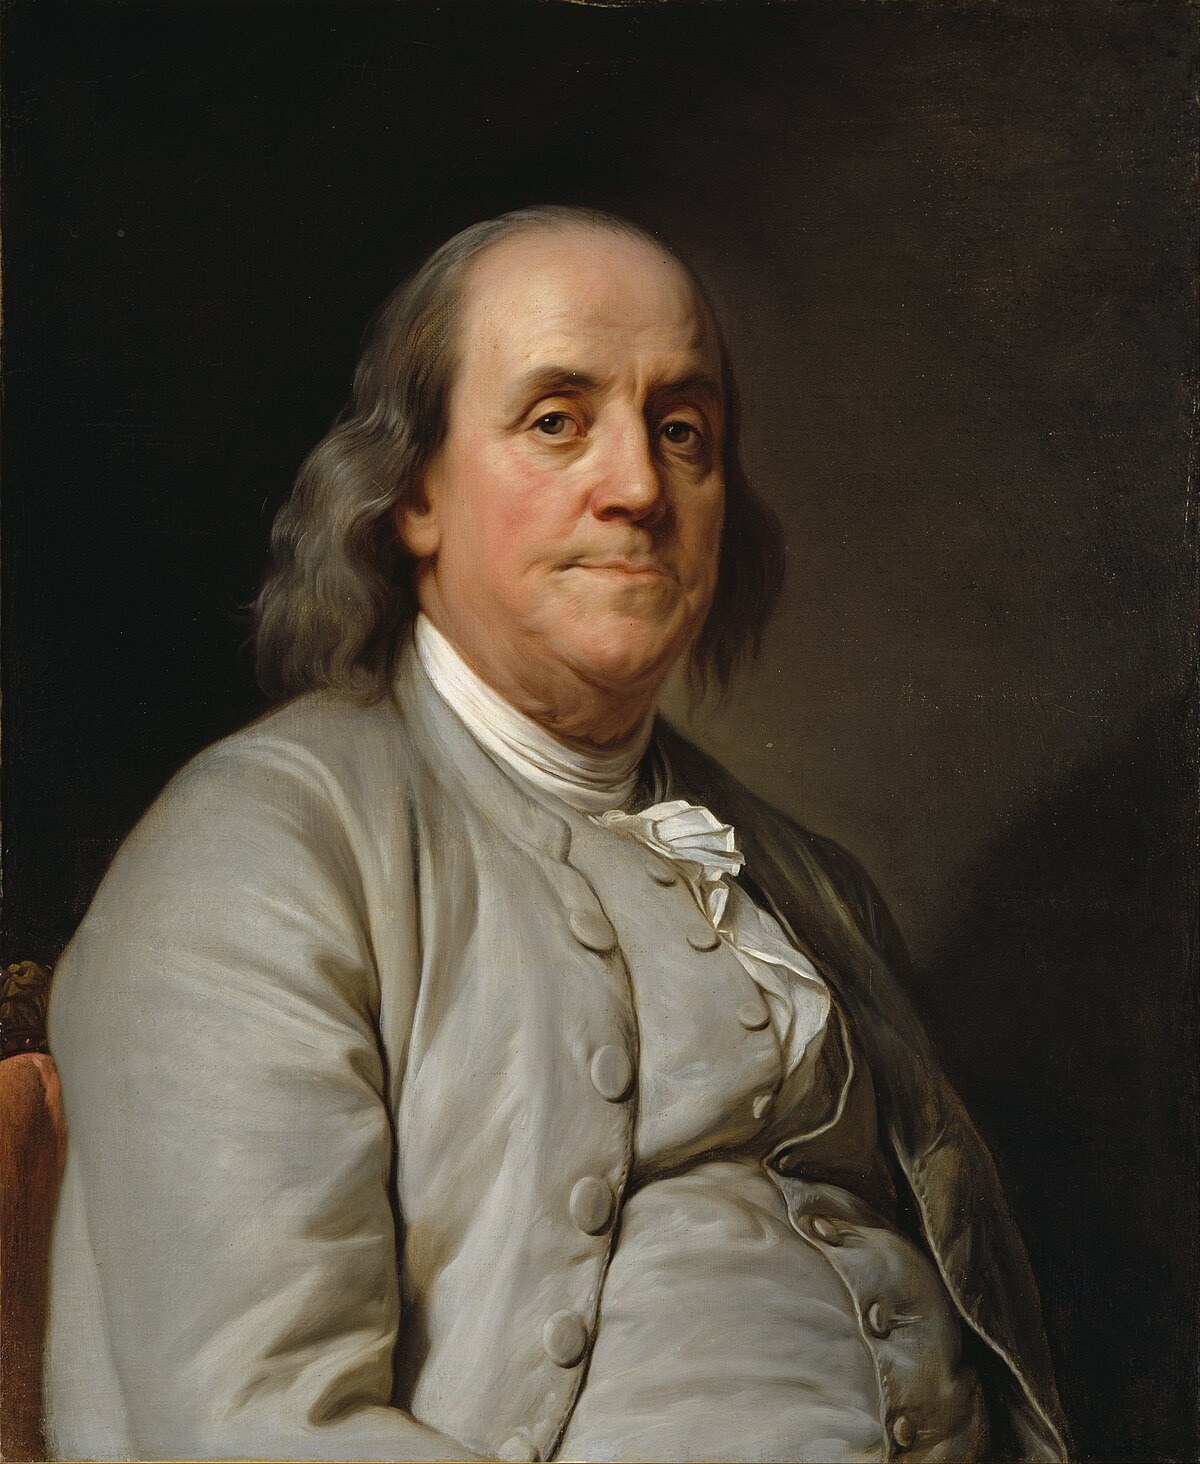 when the town of Exeter, Massachusetts renamed itself to honor Benjamin Franklin in 1778, they asked Franklin to donate a bell to the town church. Franklin responded with a donation of books instead, which formed the founding collection of America's first public library.